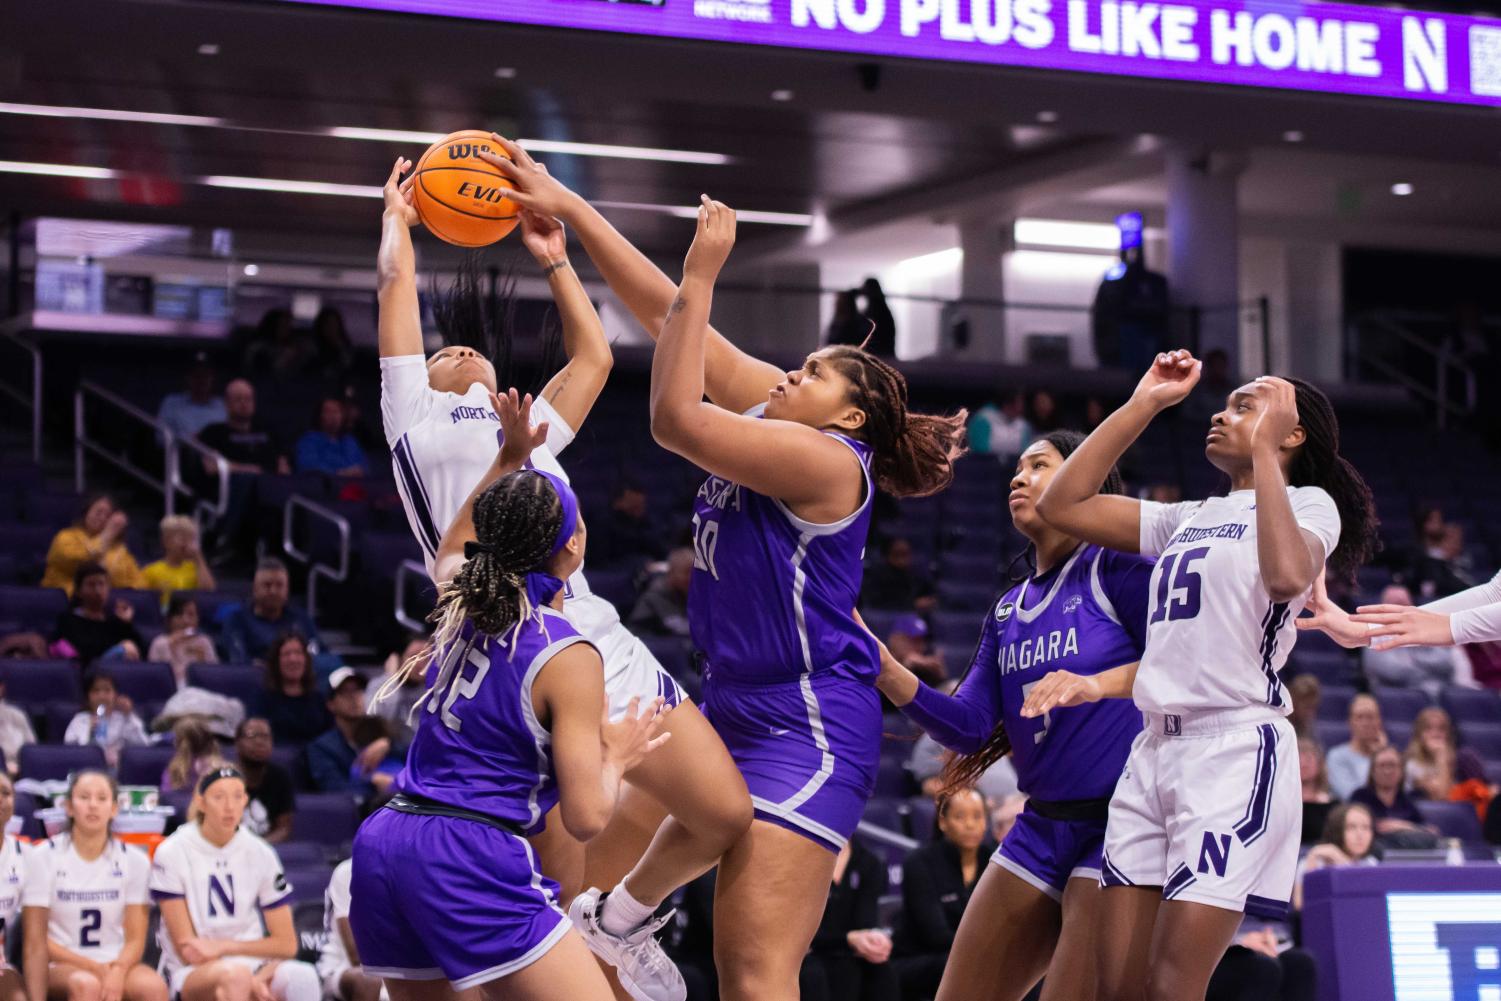 A basketball player in white catches the basketball as other players in purple and white try to reach for it.